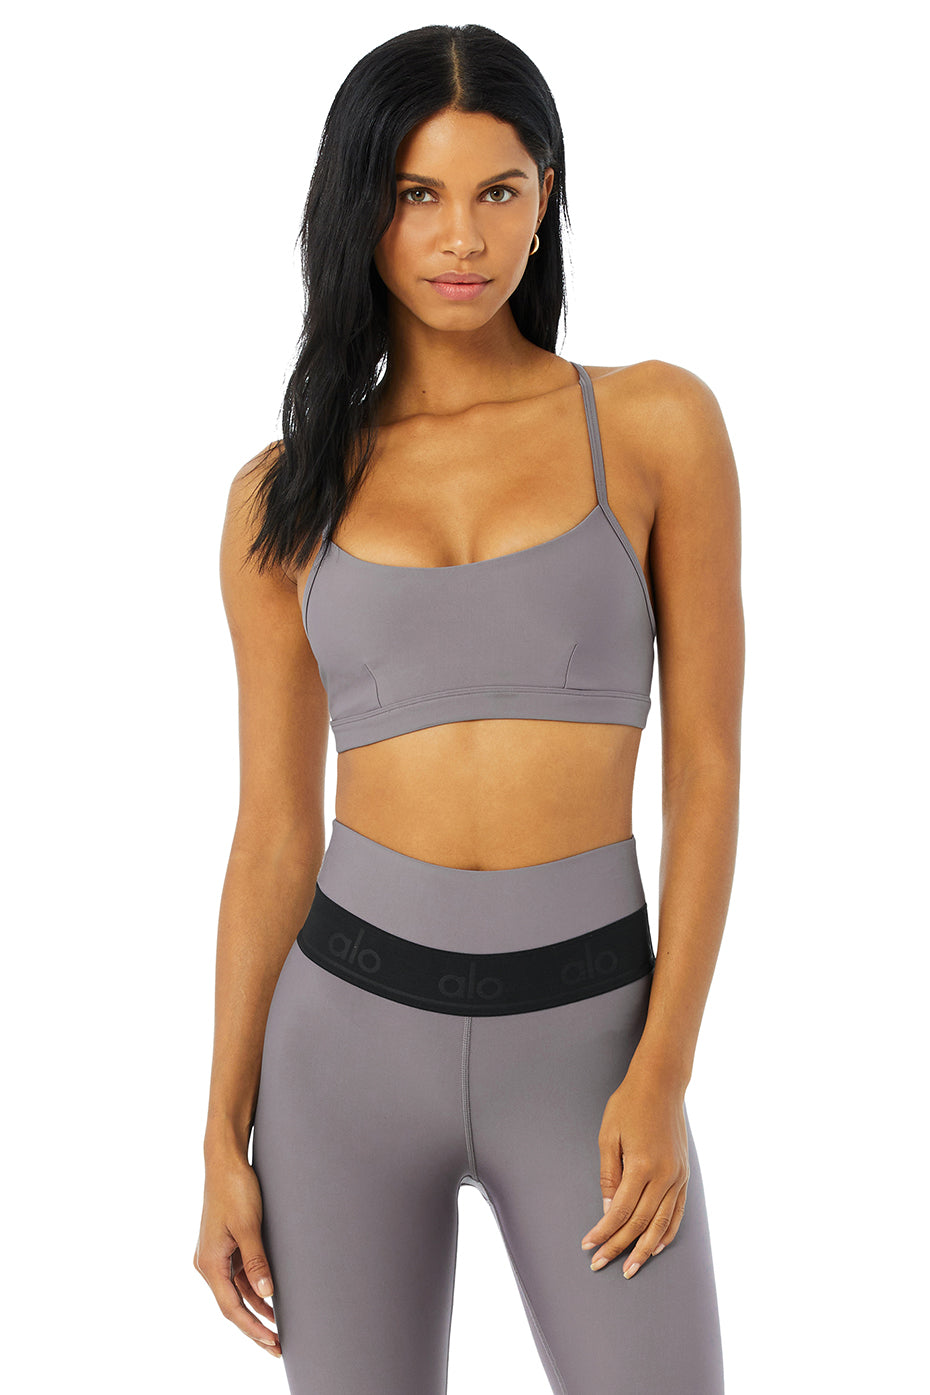 Airlift Intrigue Bra in Pink Lavender by Alo Yoga - Work Well Daily